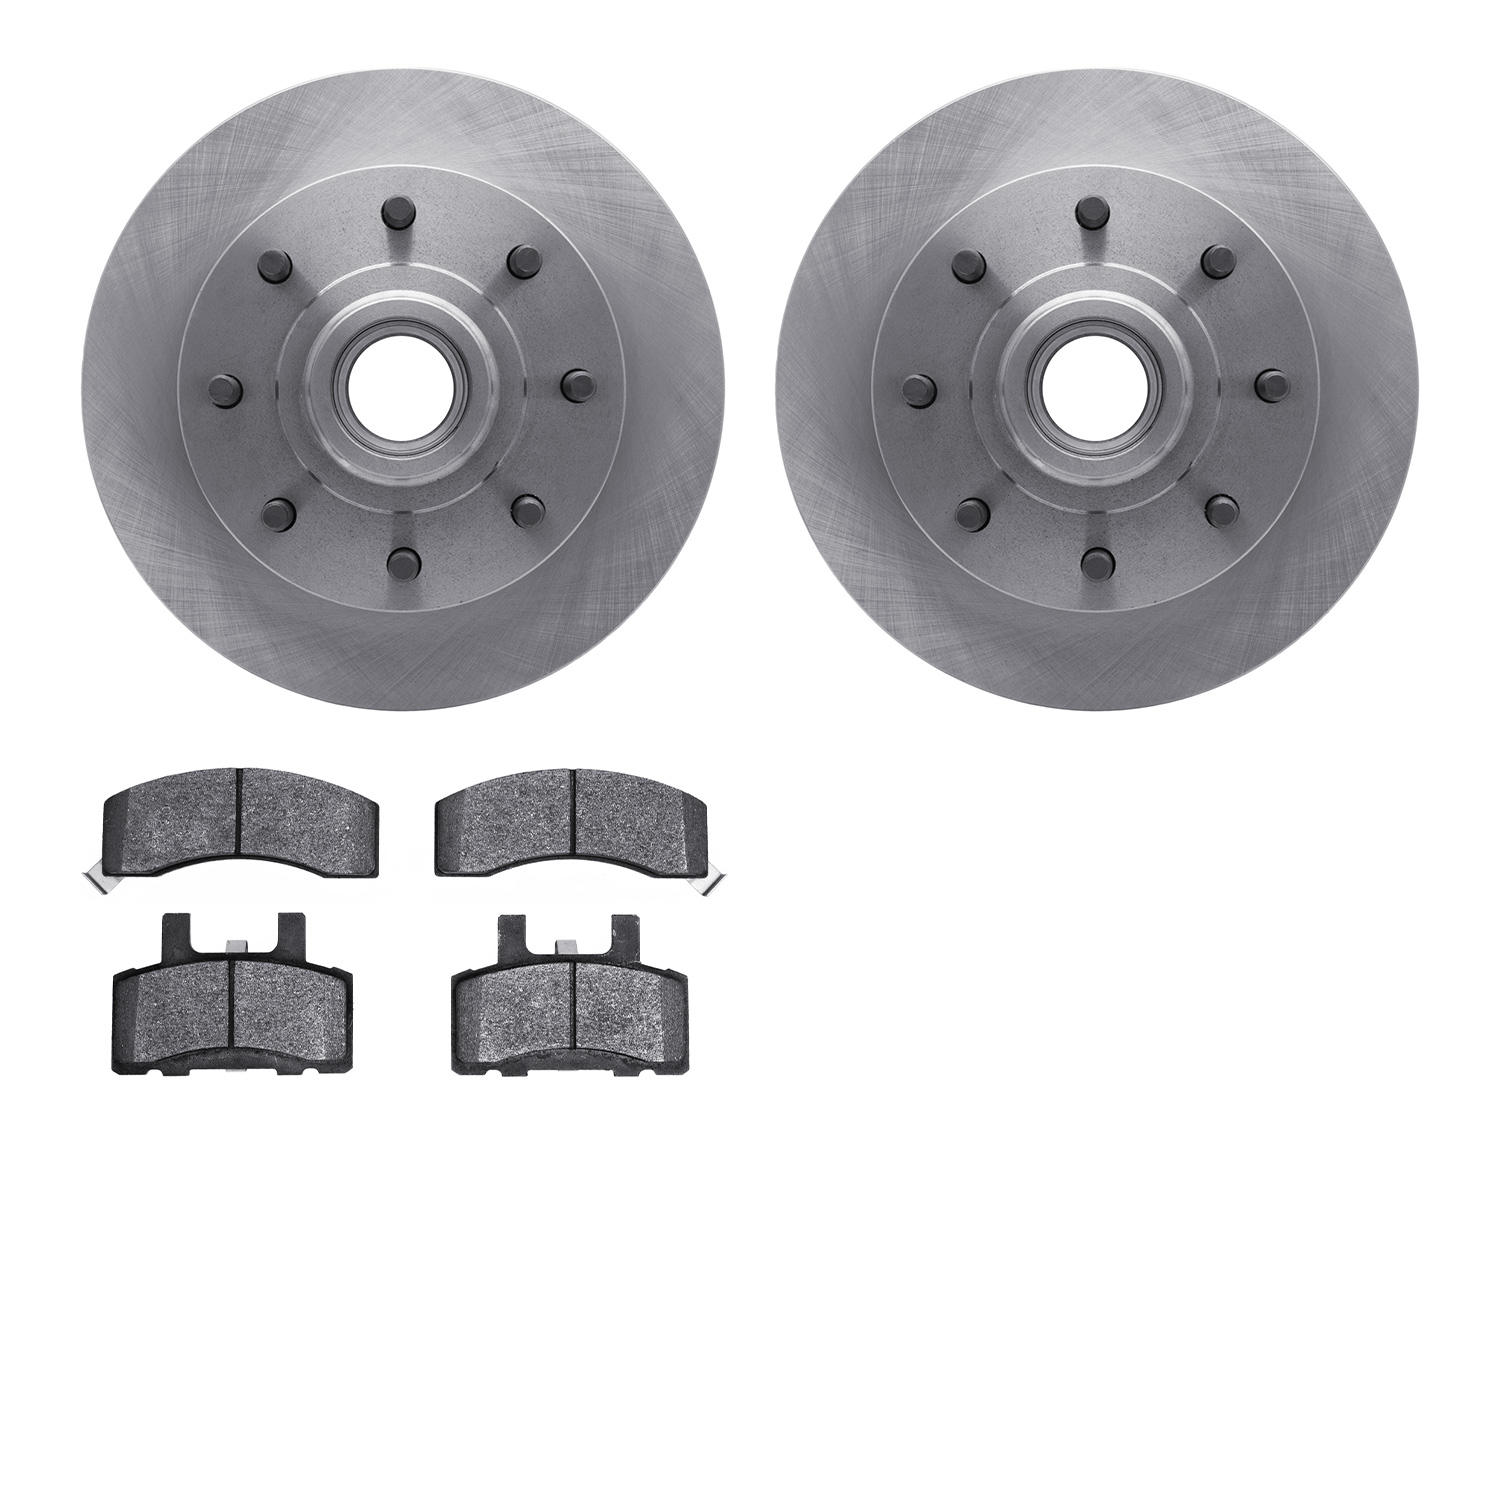 6402-48022 Brake Rotors with Ultimate-Duty Brake Pads, 1988-1996 GM, Position: Front